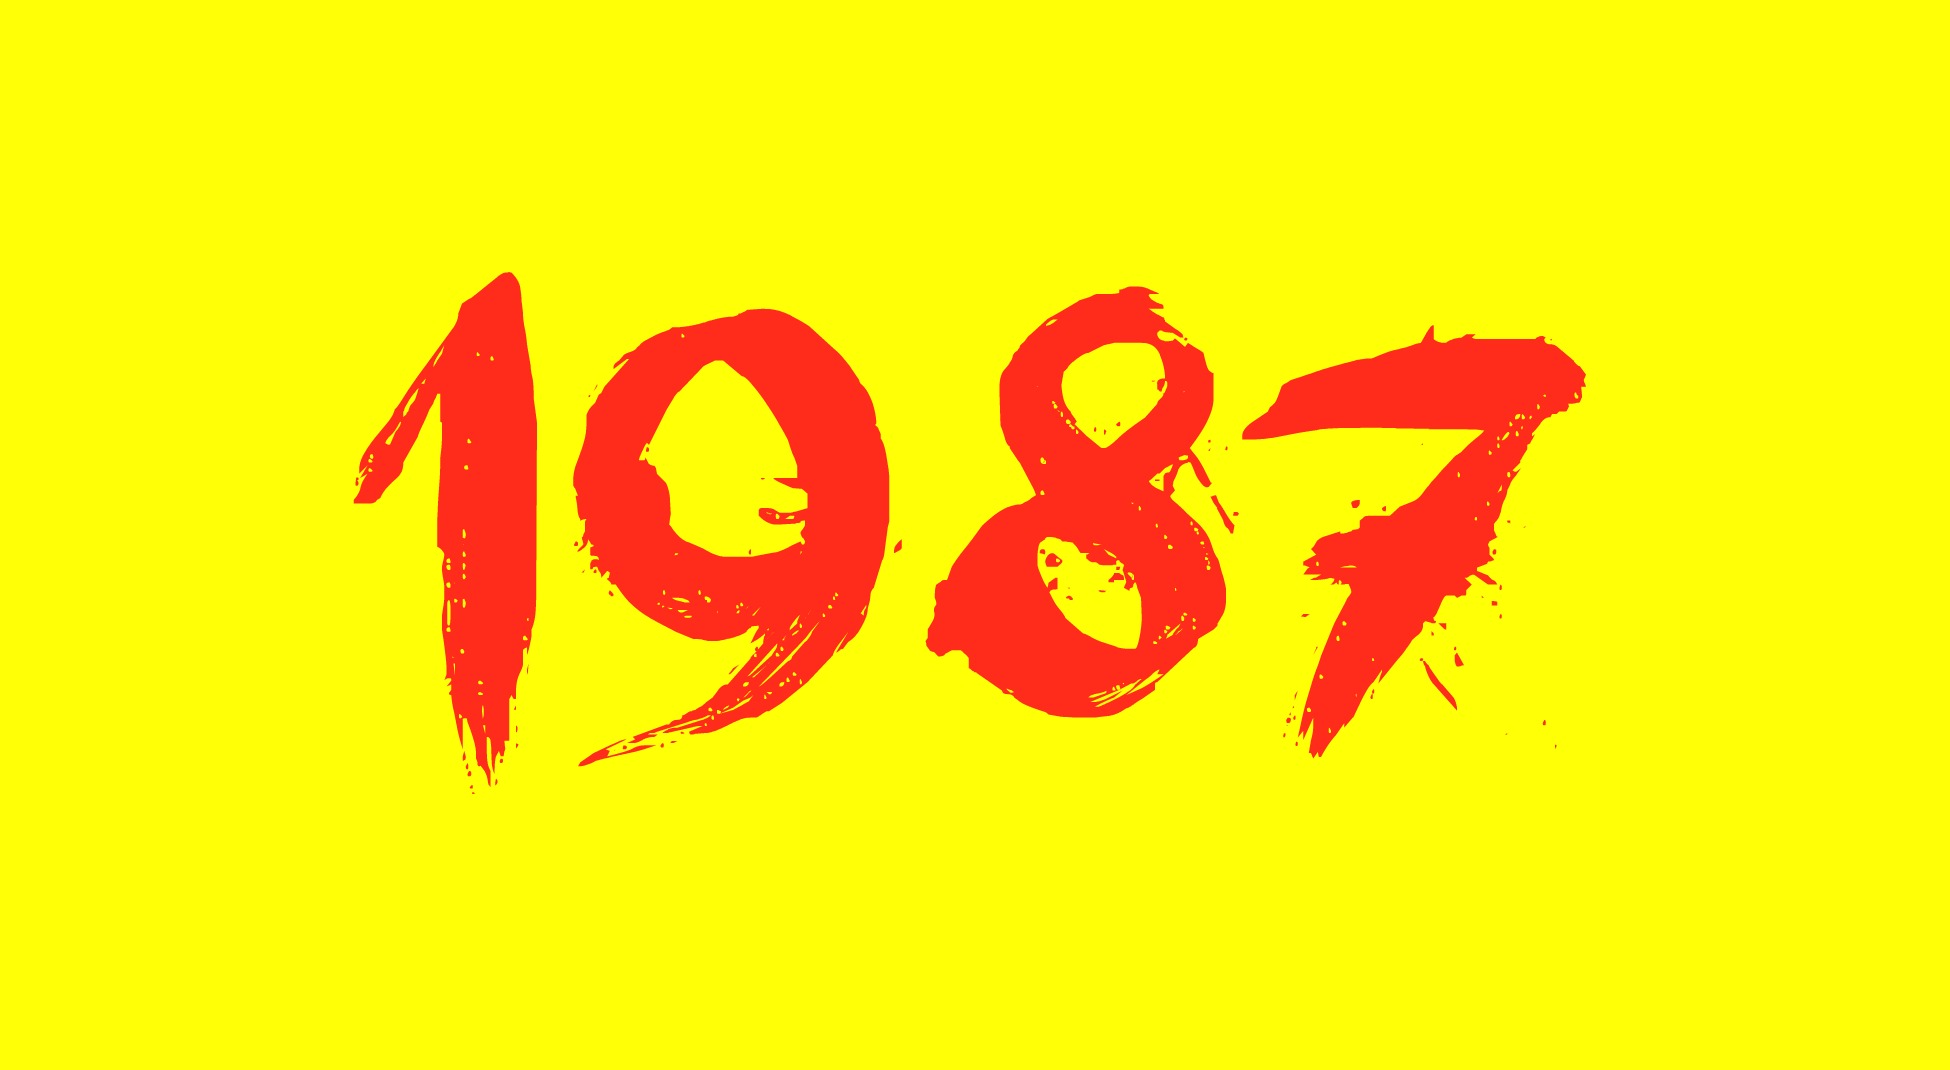 1987: The Year that Was